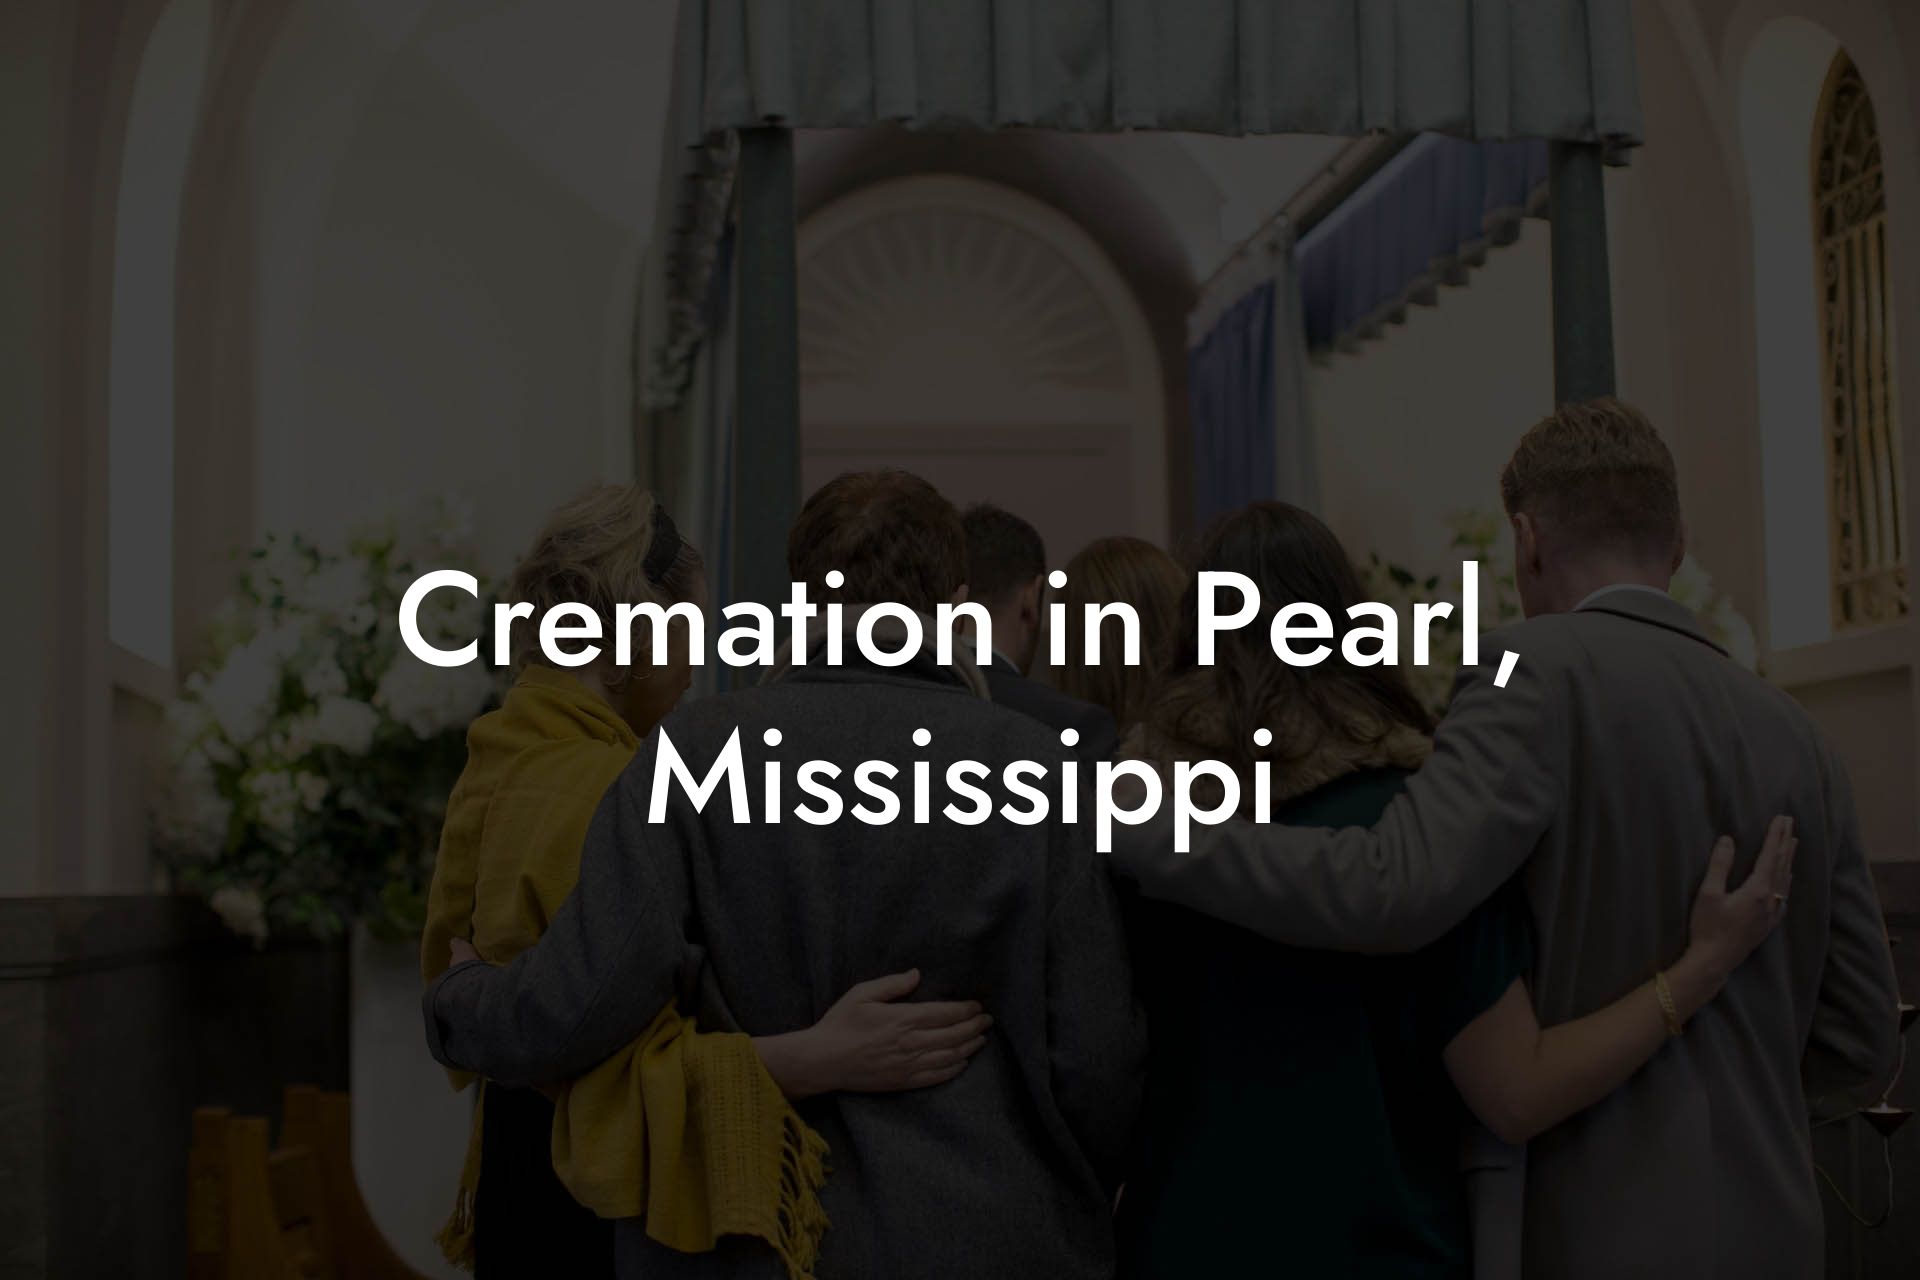 Cremation in Pearl, Mississippi